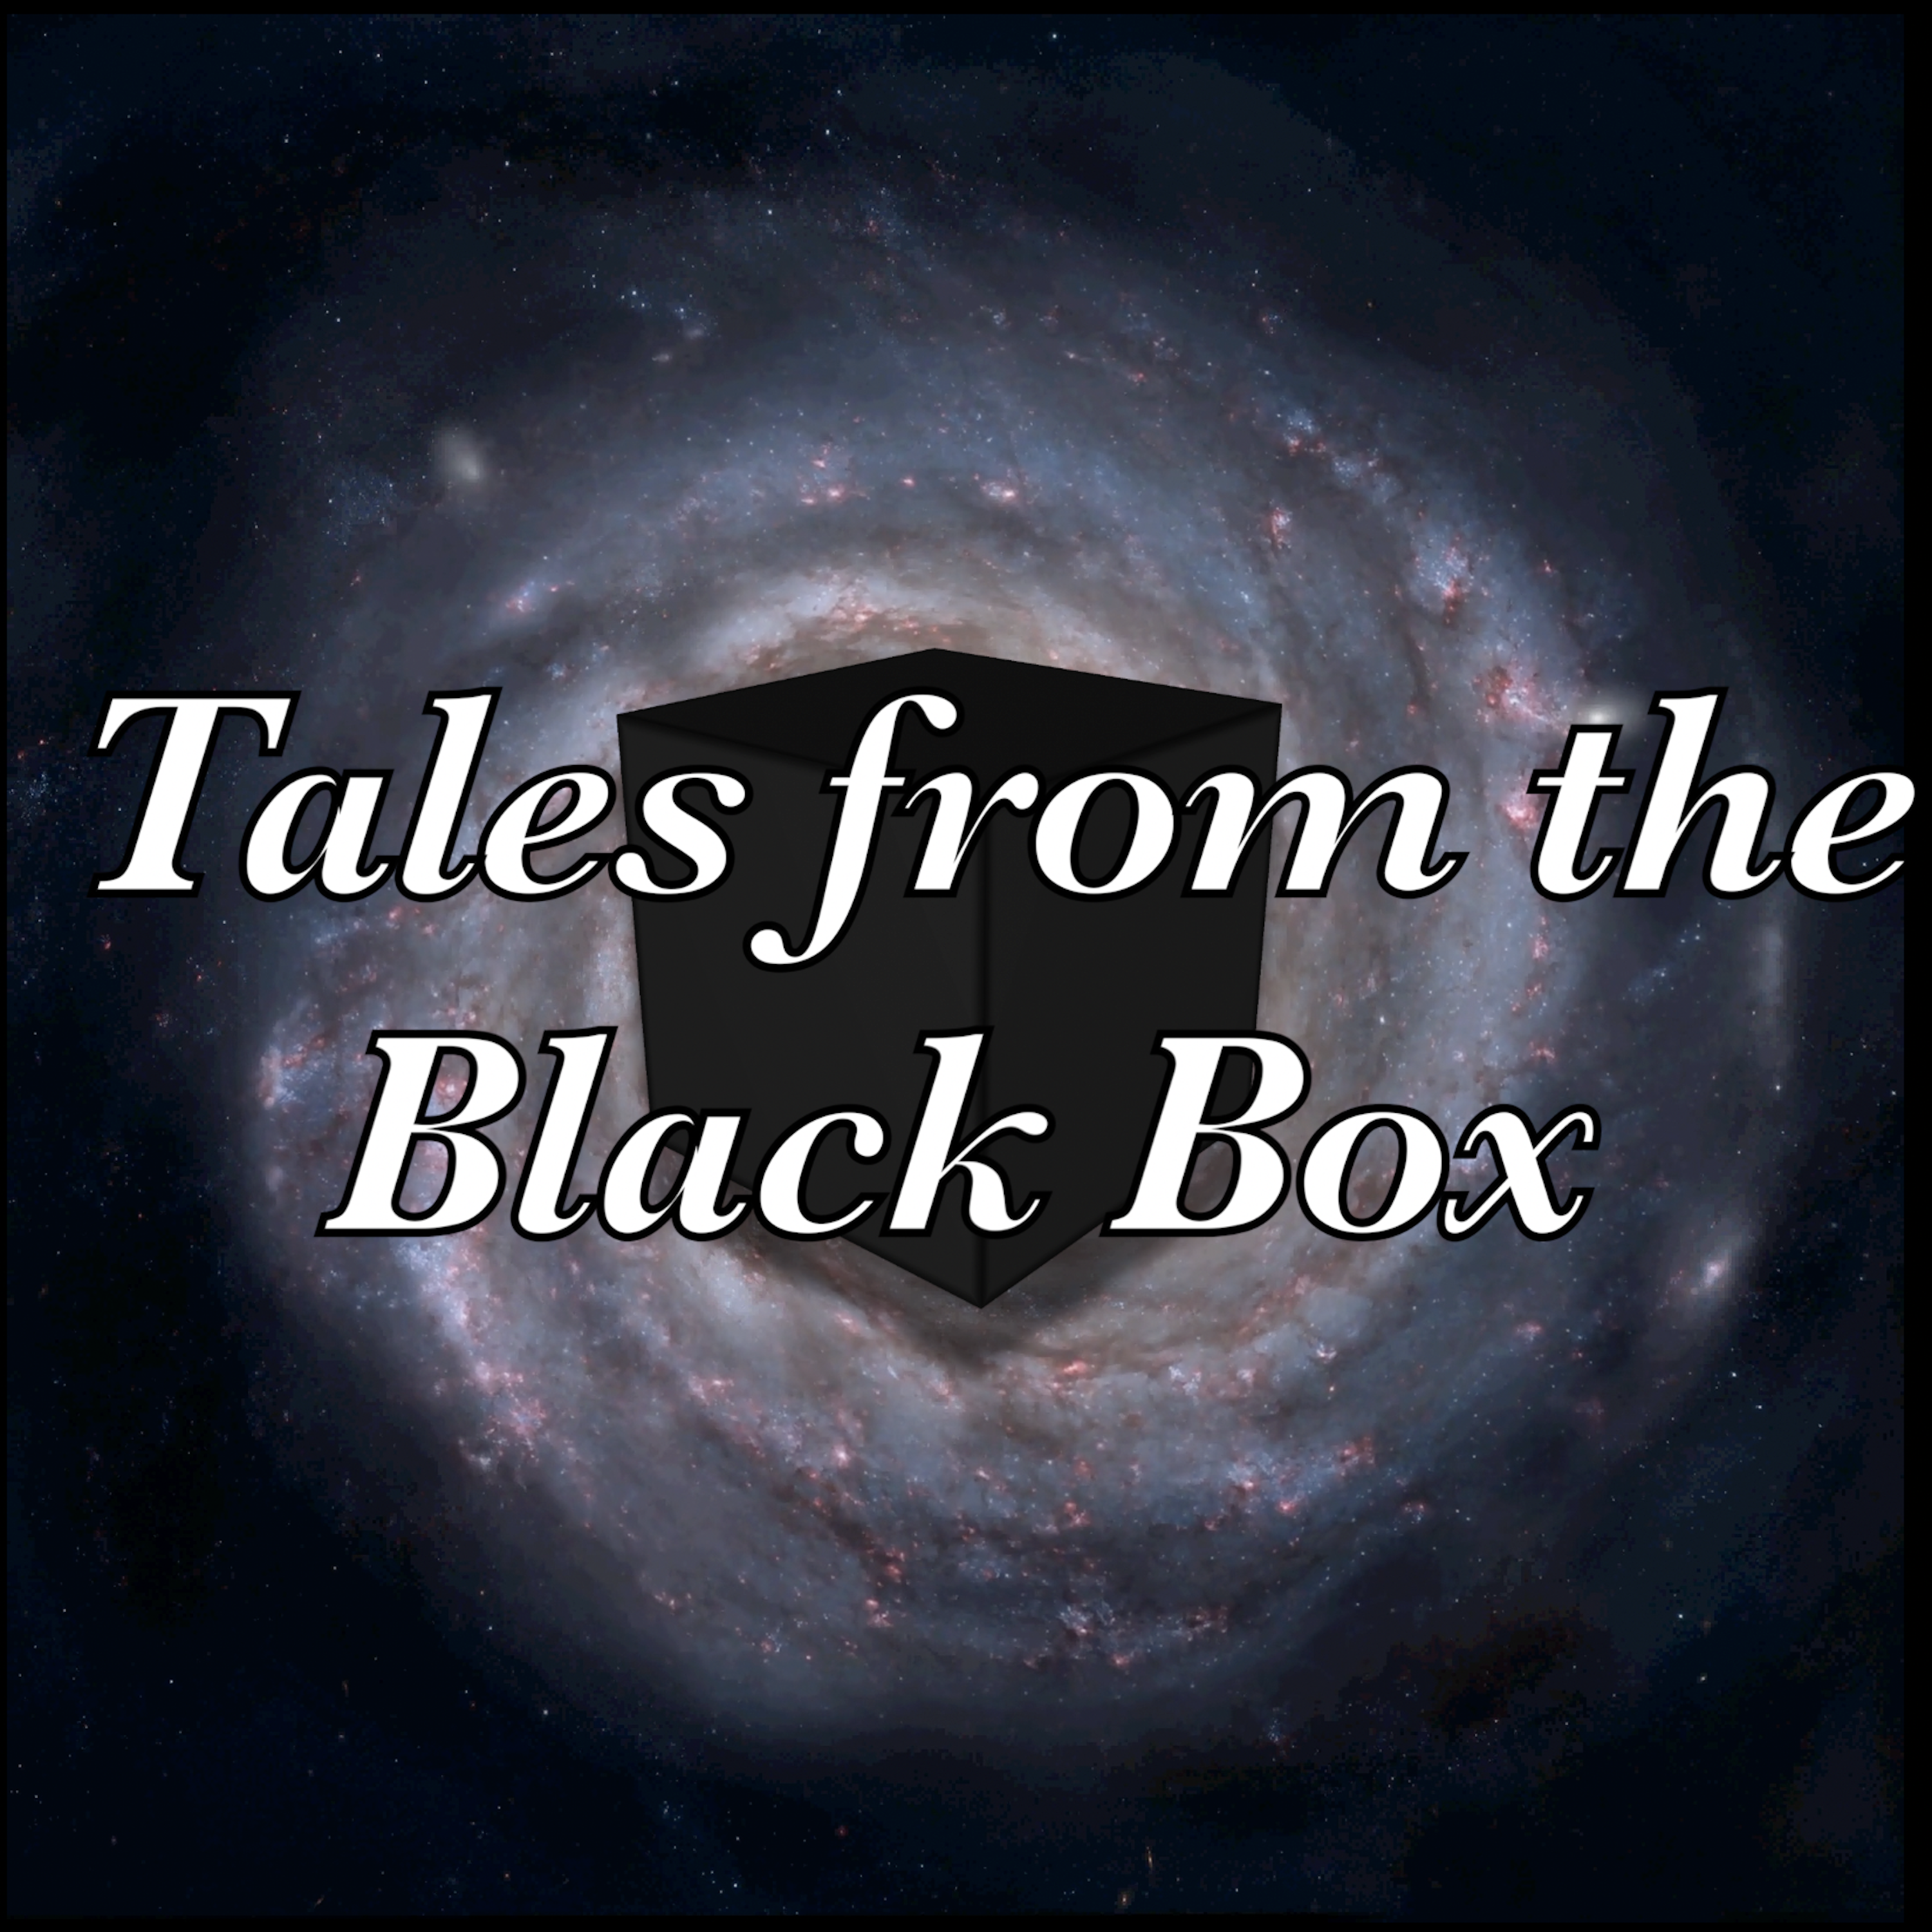 "Tales from the Black Box" Teaser Trailer #2